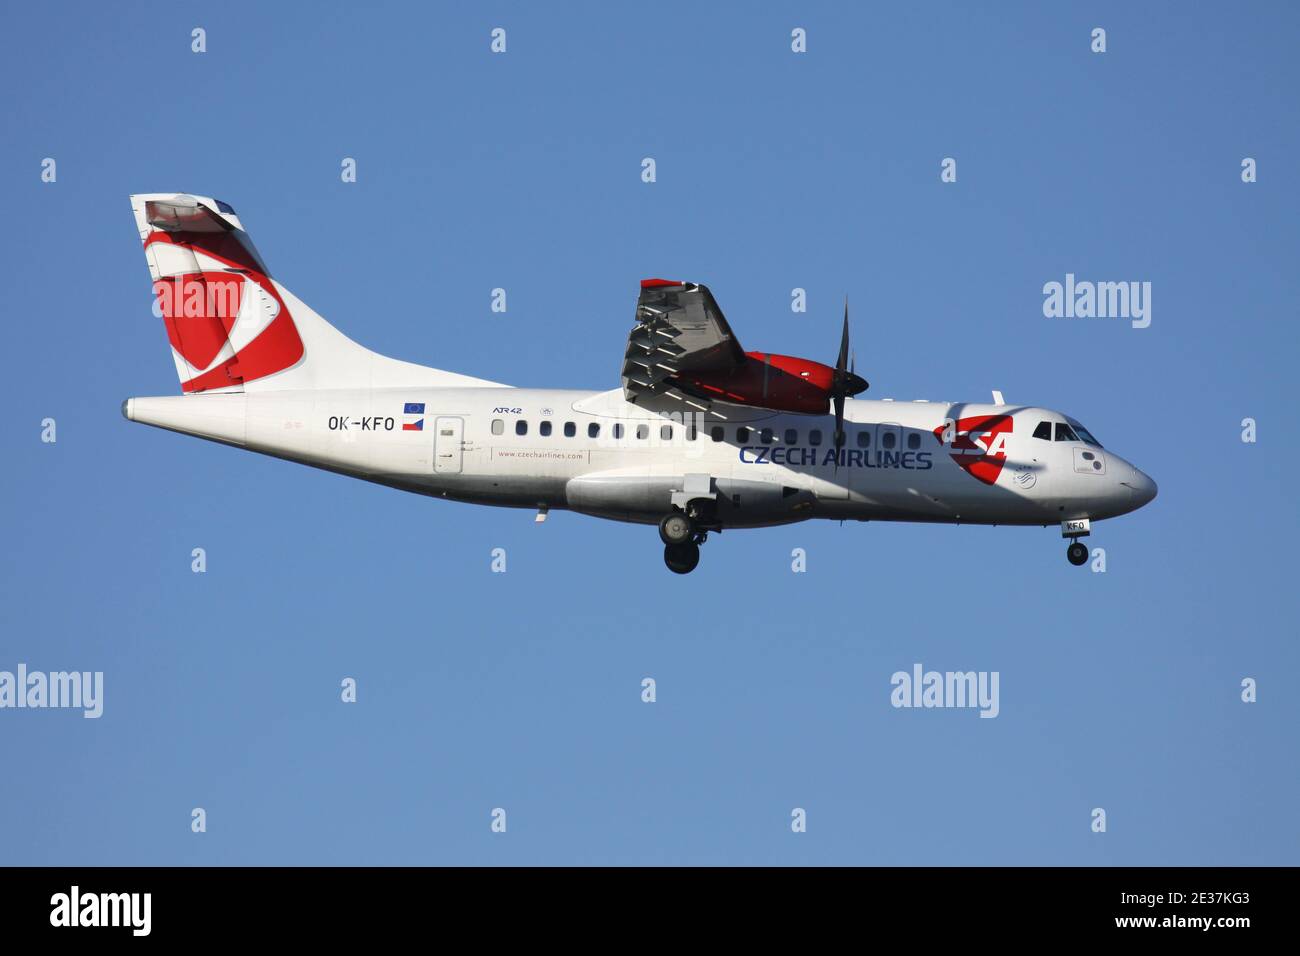 CSA Czech Airlines ATR 42 with registration OK-KFO on short final for runway 05R of Dusseldorf Airport. Stock Photo